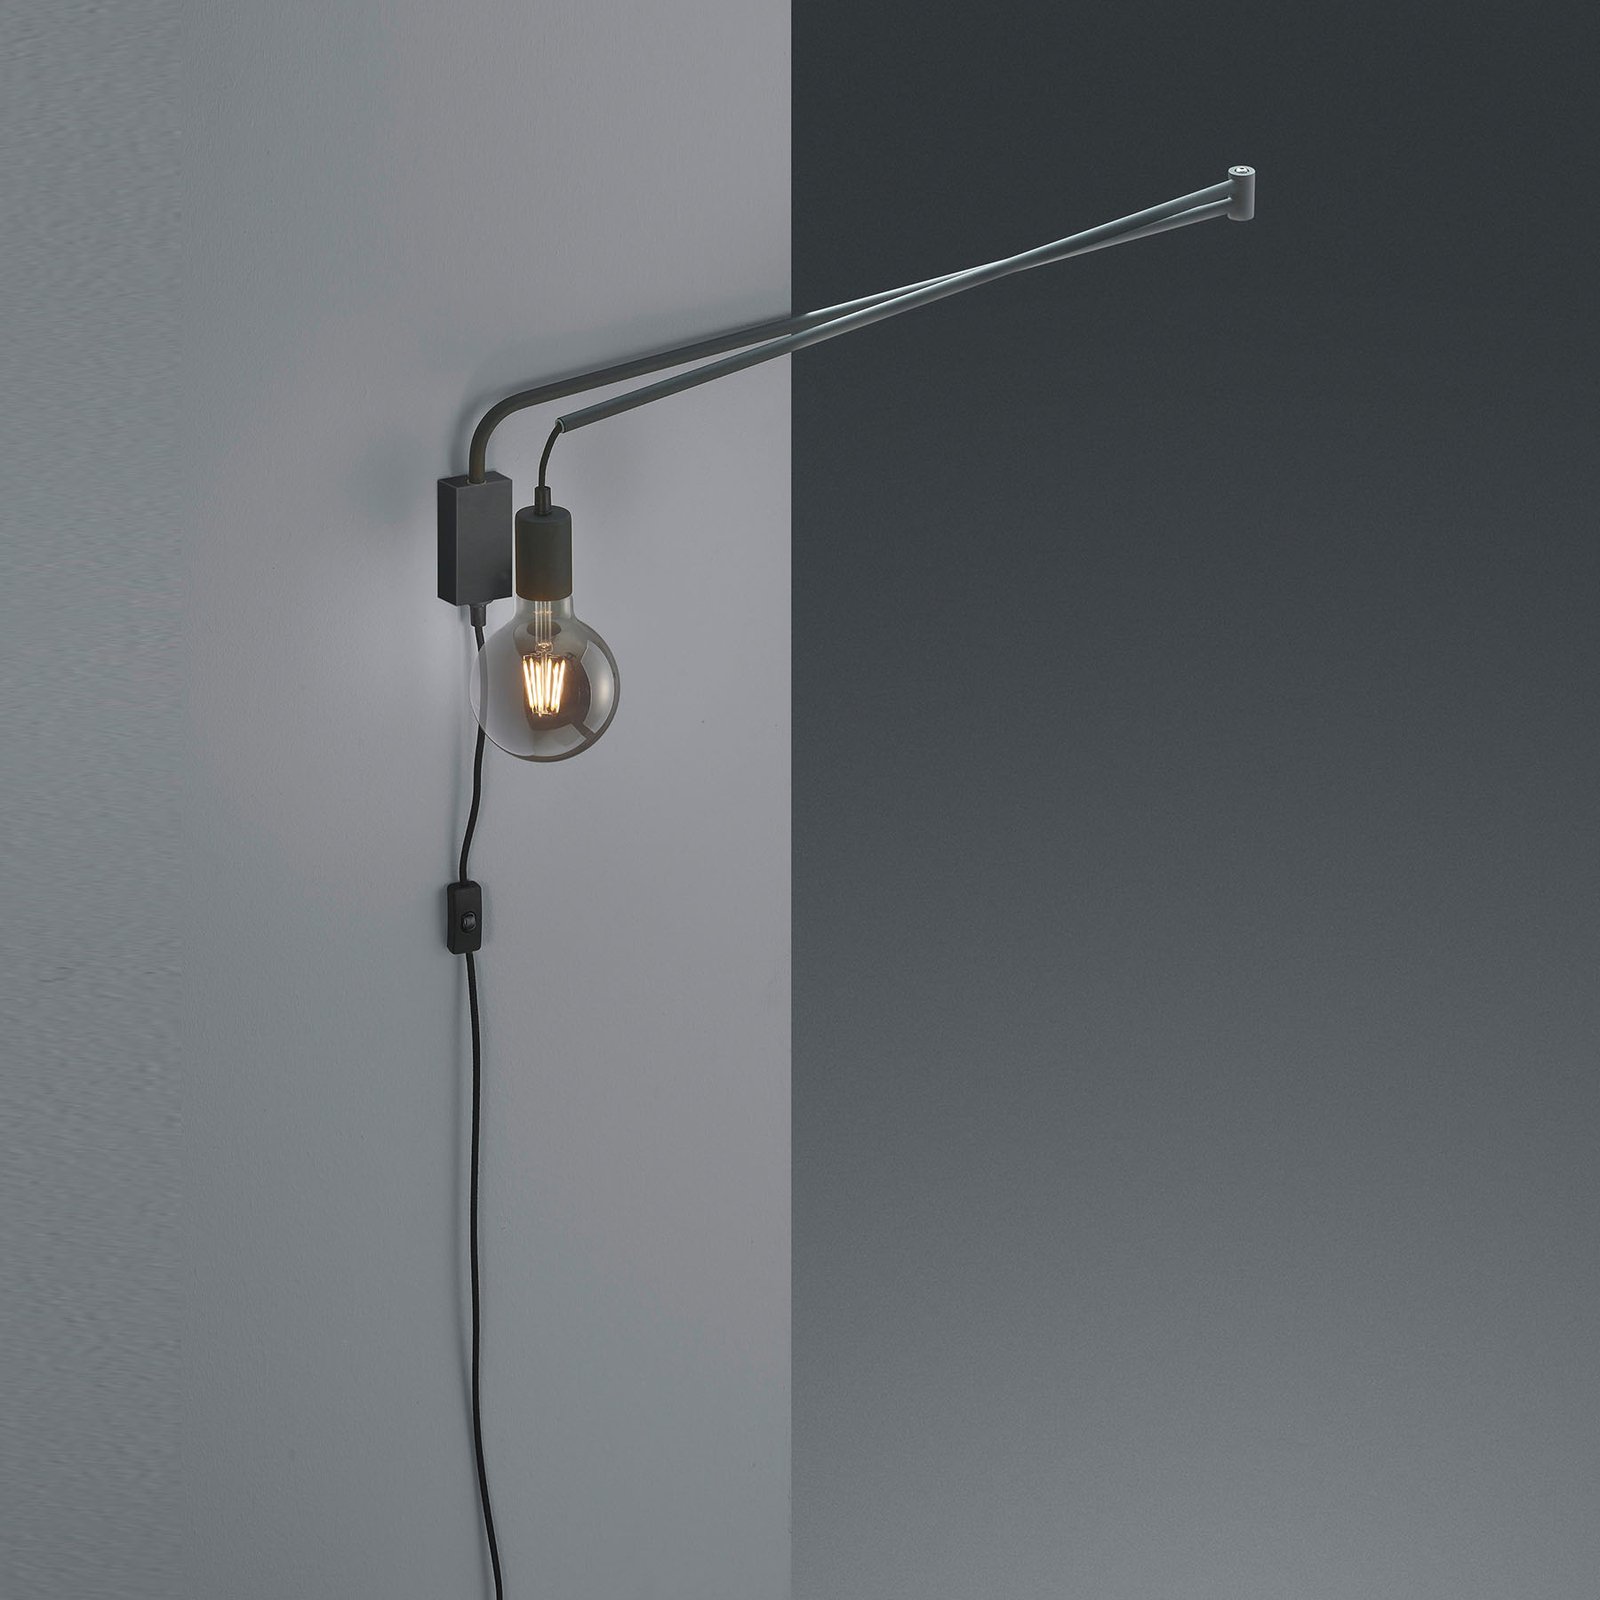 Line wall light with cable and plug, black